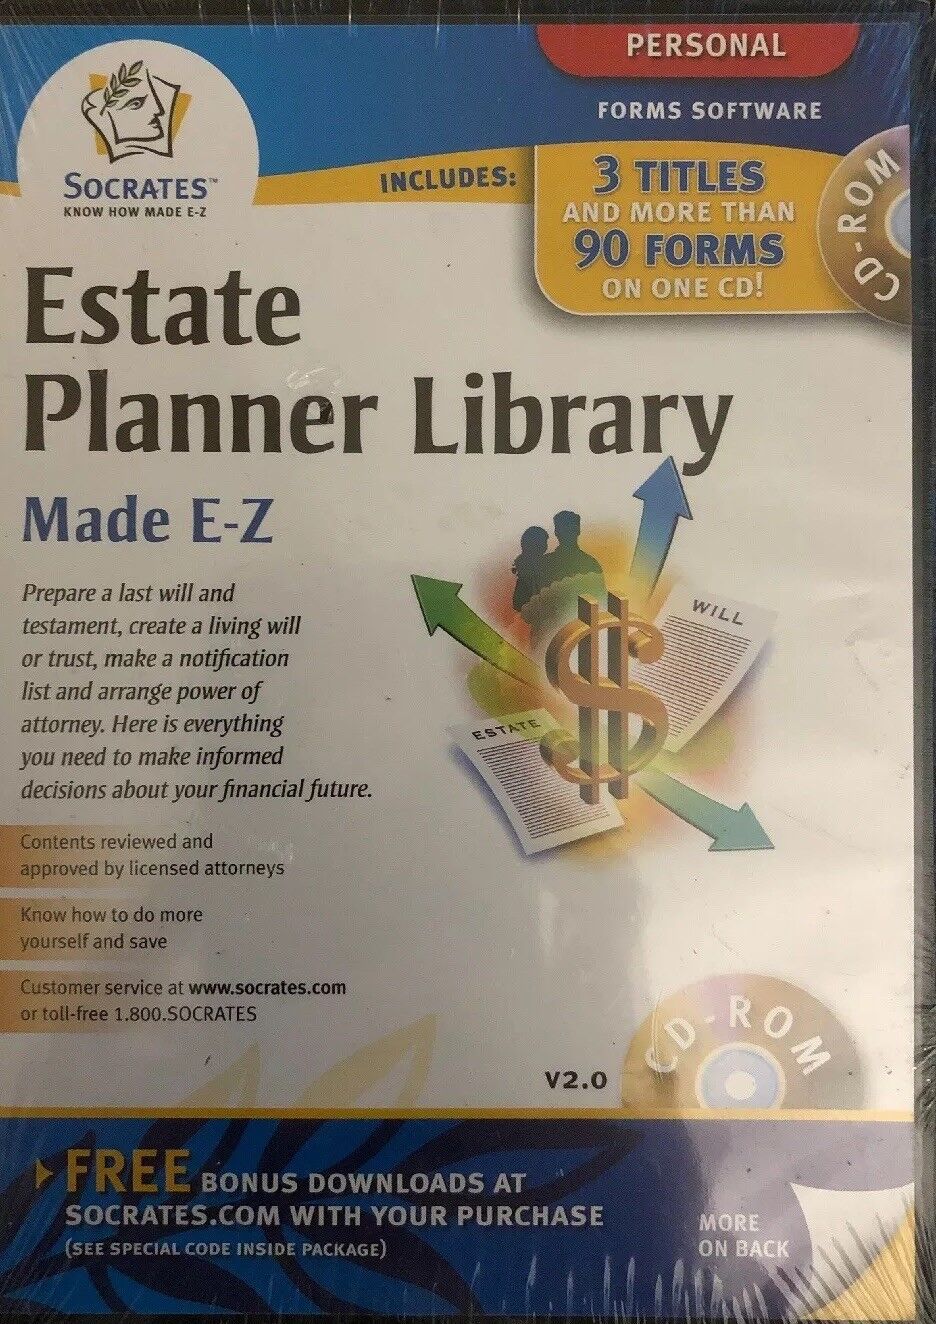 Estate Planner Library Made E-Z 90 Forms(2004 PC CD-ROM Socrates)NEW-SHIP N 24HR